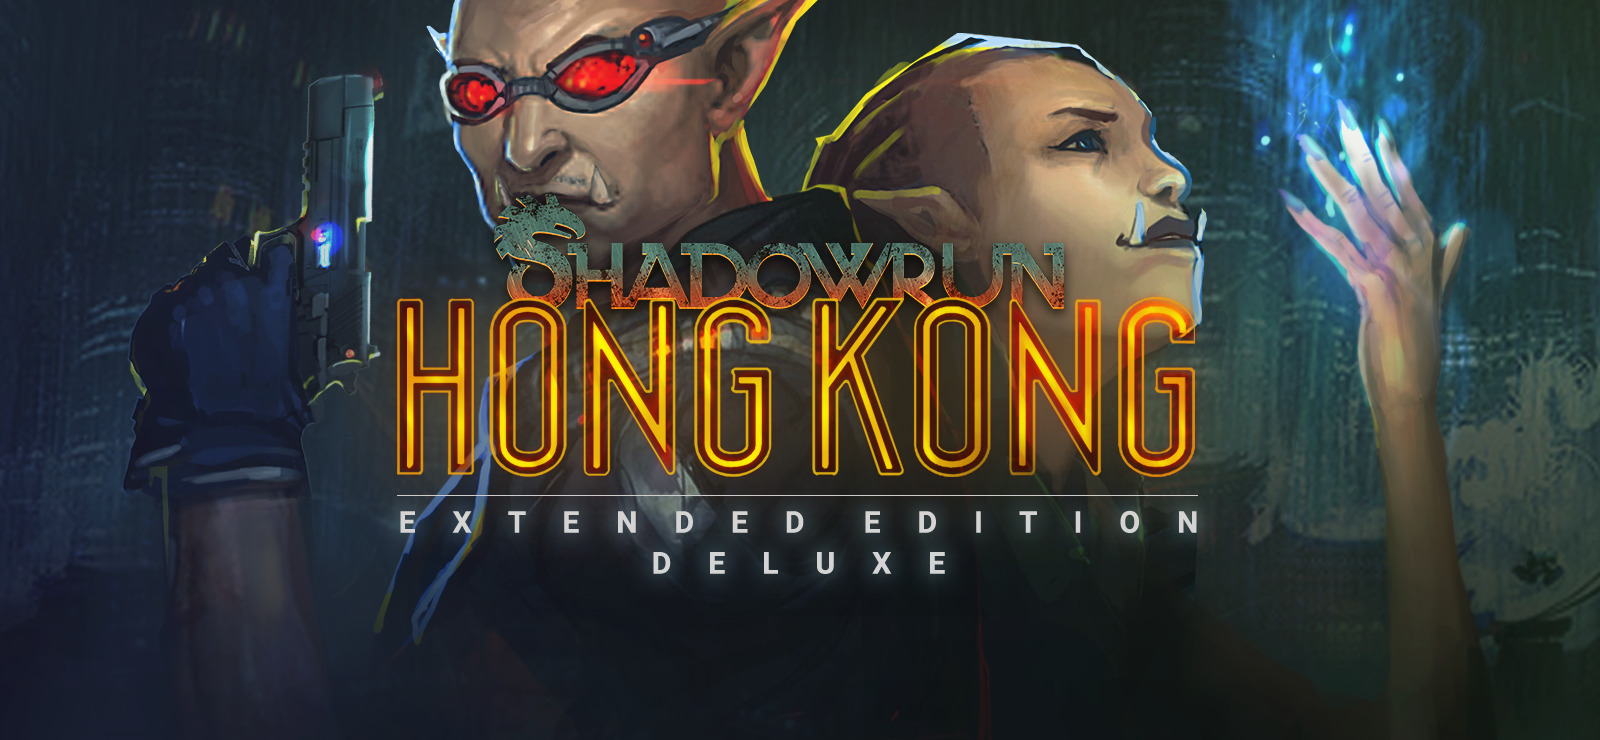 Shadowrun: Hong Kong release date confirmed for August